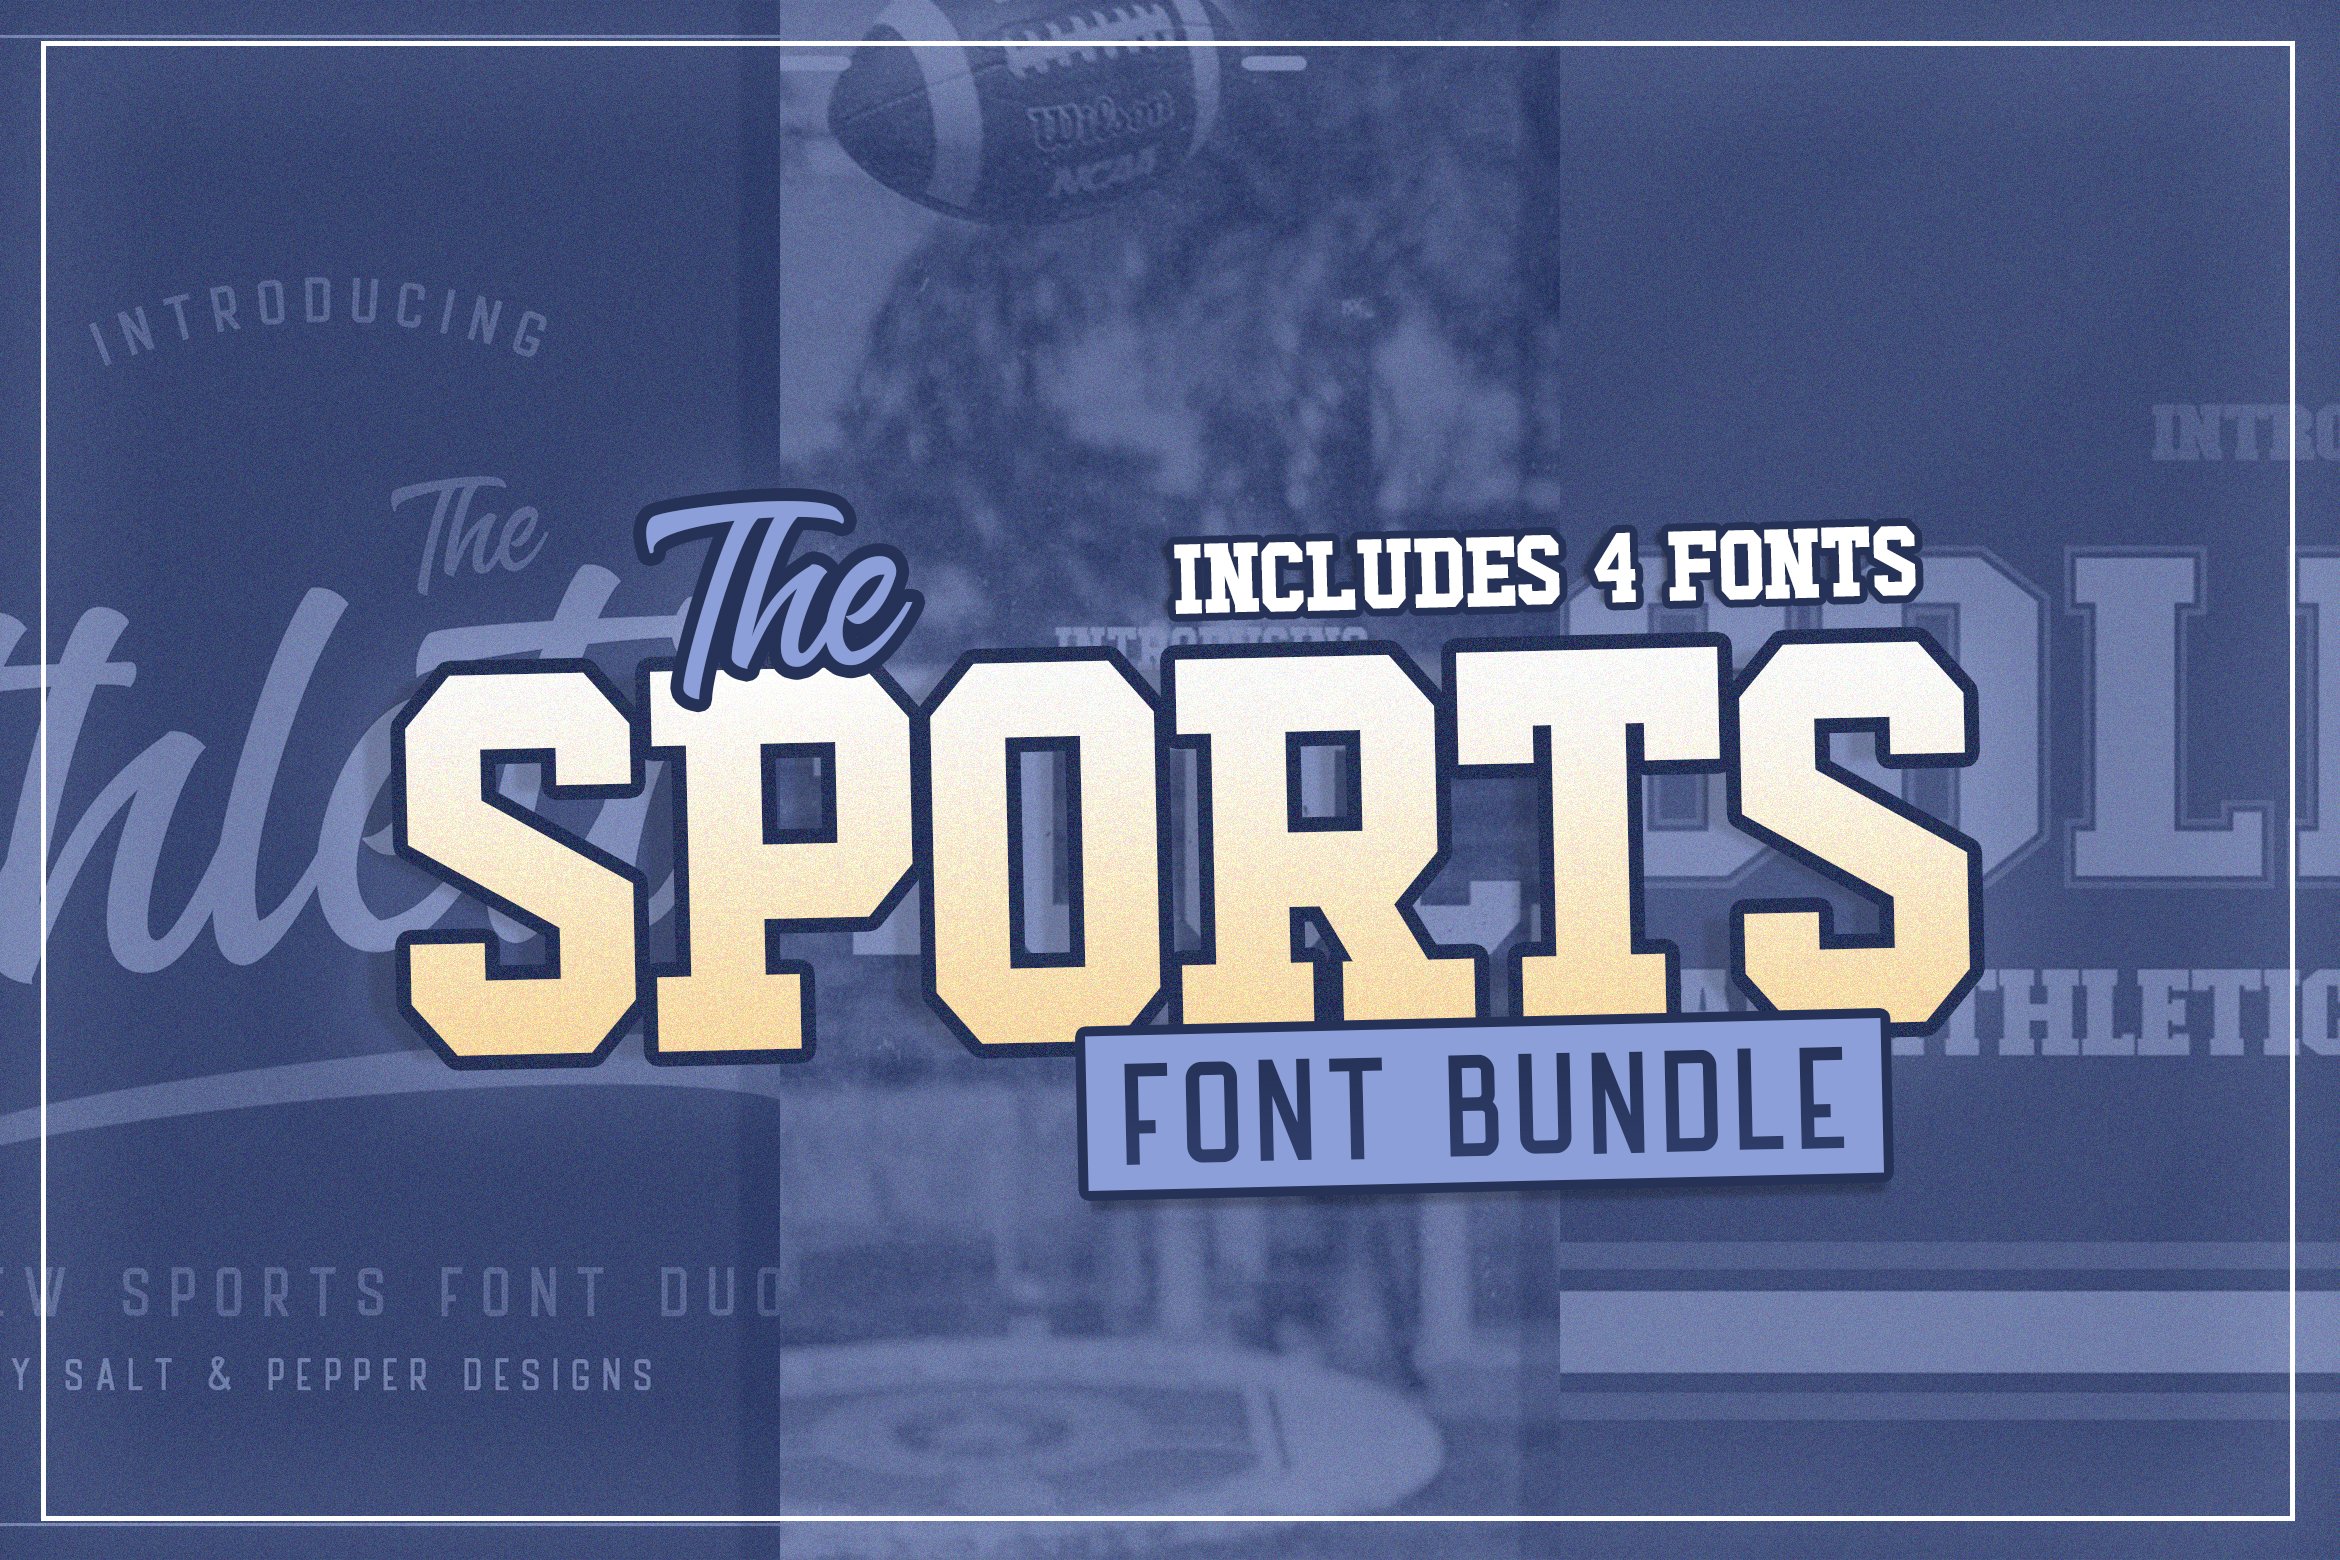 The Sports Font Bundle cover image.